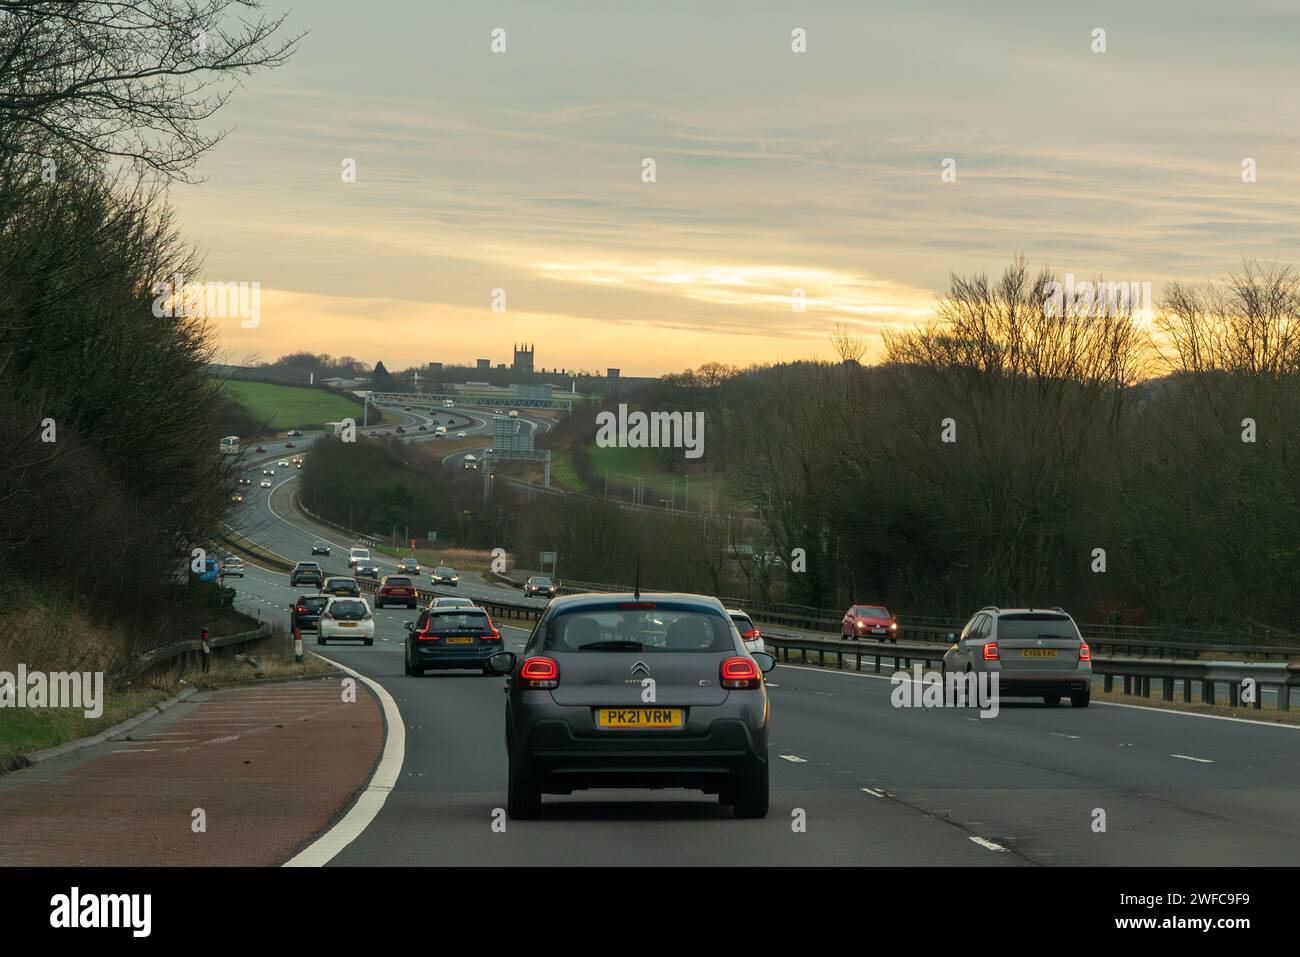 m6 southbound motorway with cars Stock Photo